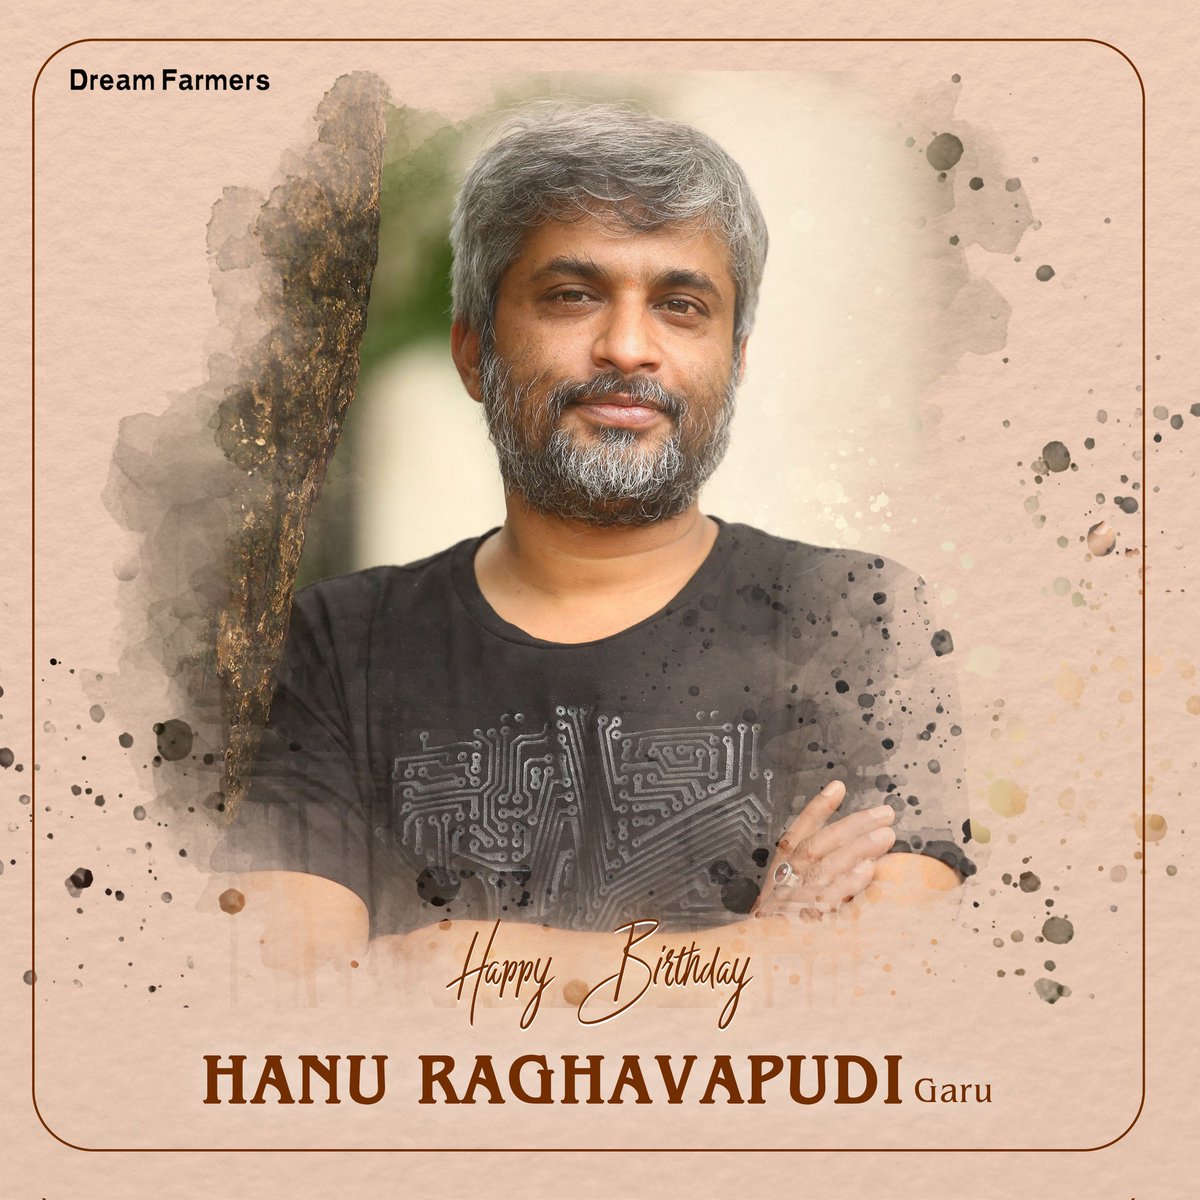 Happy Birthday to the Amazing & Captivating story teller @hanurpudi Garu. May your year be filled with love, laughter, and all the things that bring you joy. #HBDHanuRaghavaPudi